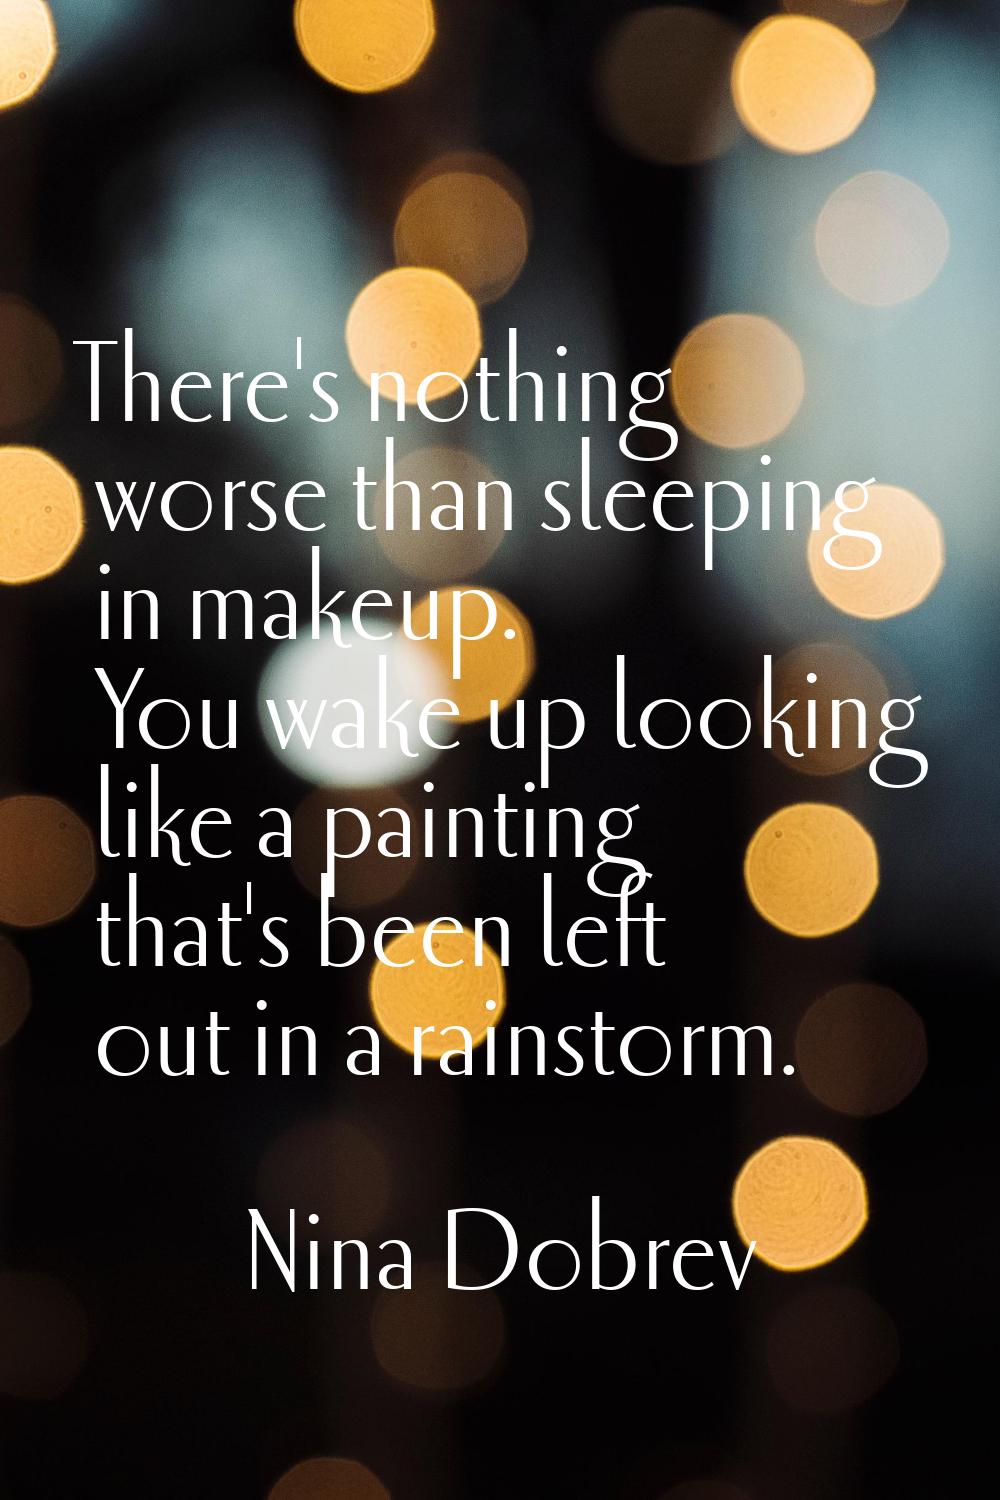 There's nothing worse than sleeping in makeup. You wake up looking like a painting that's been left